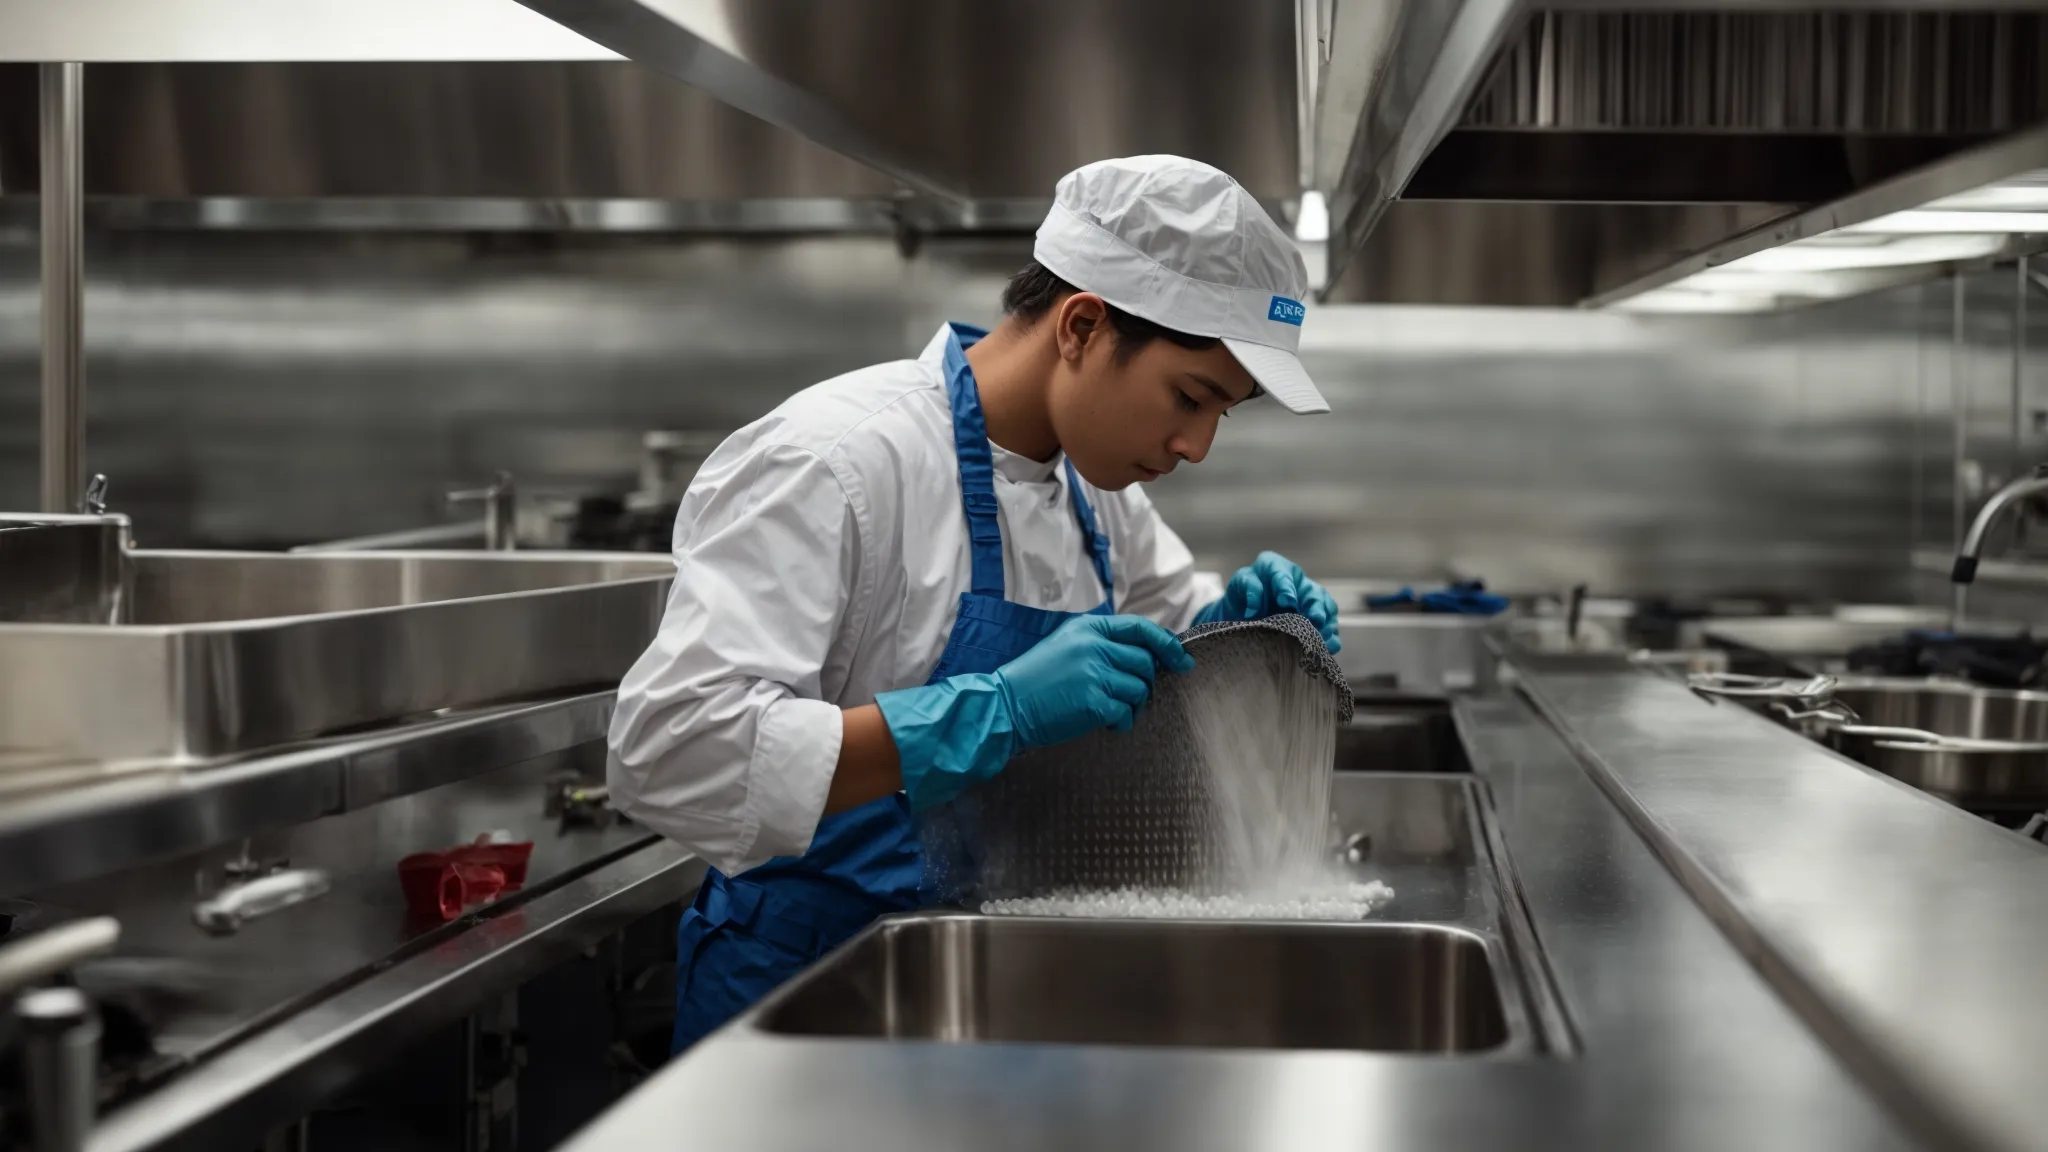 a professional cleaner, equipped with safety gear, scrubbing the greasy filters of a commercial kitchen hood.